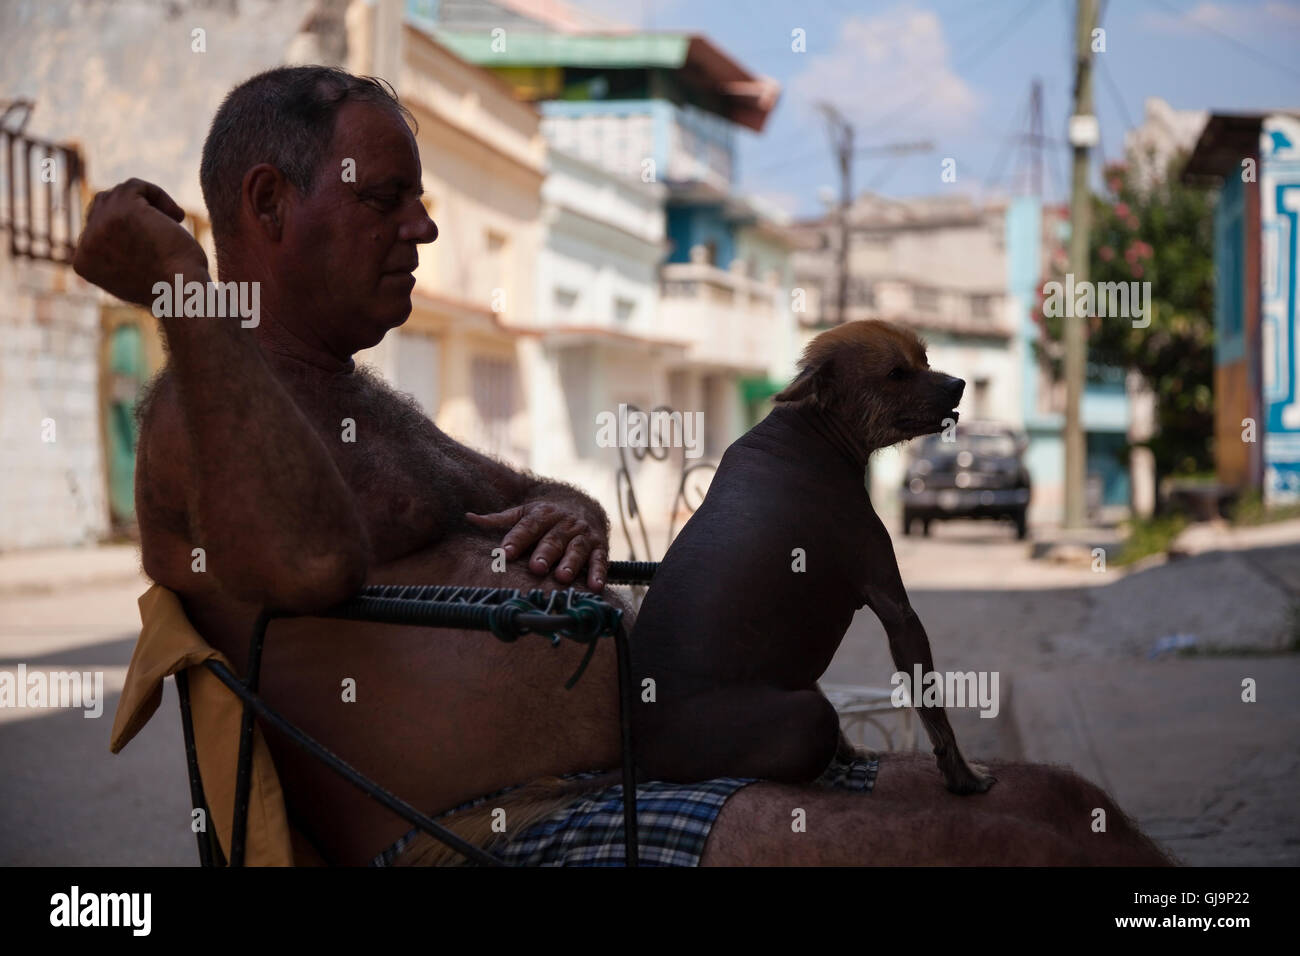 A man with his hairless dog sitting on his lap in the municipality of Regla, Havana, Cuba. Stock Photo